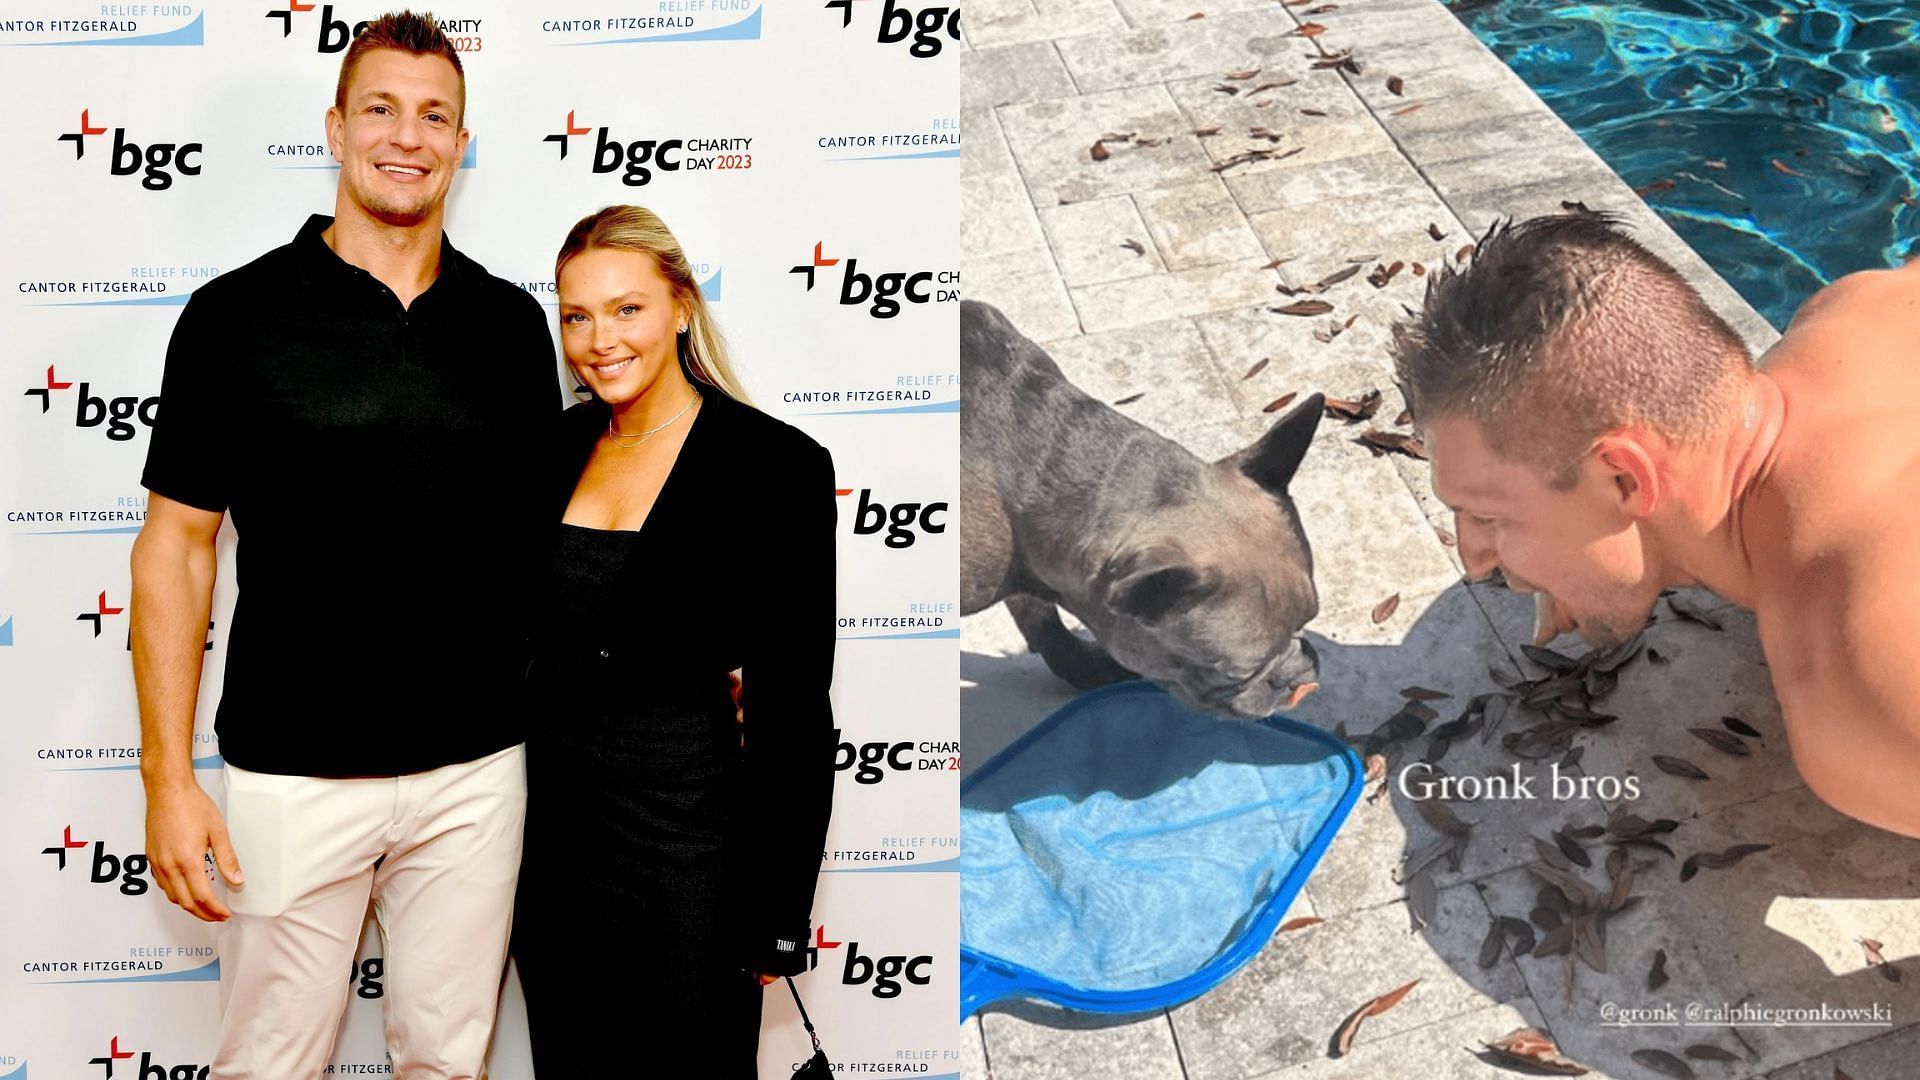 Rob Gronkowski and Camille Kostek go on a quick vacation